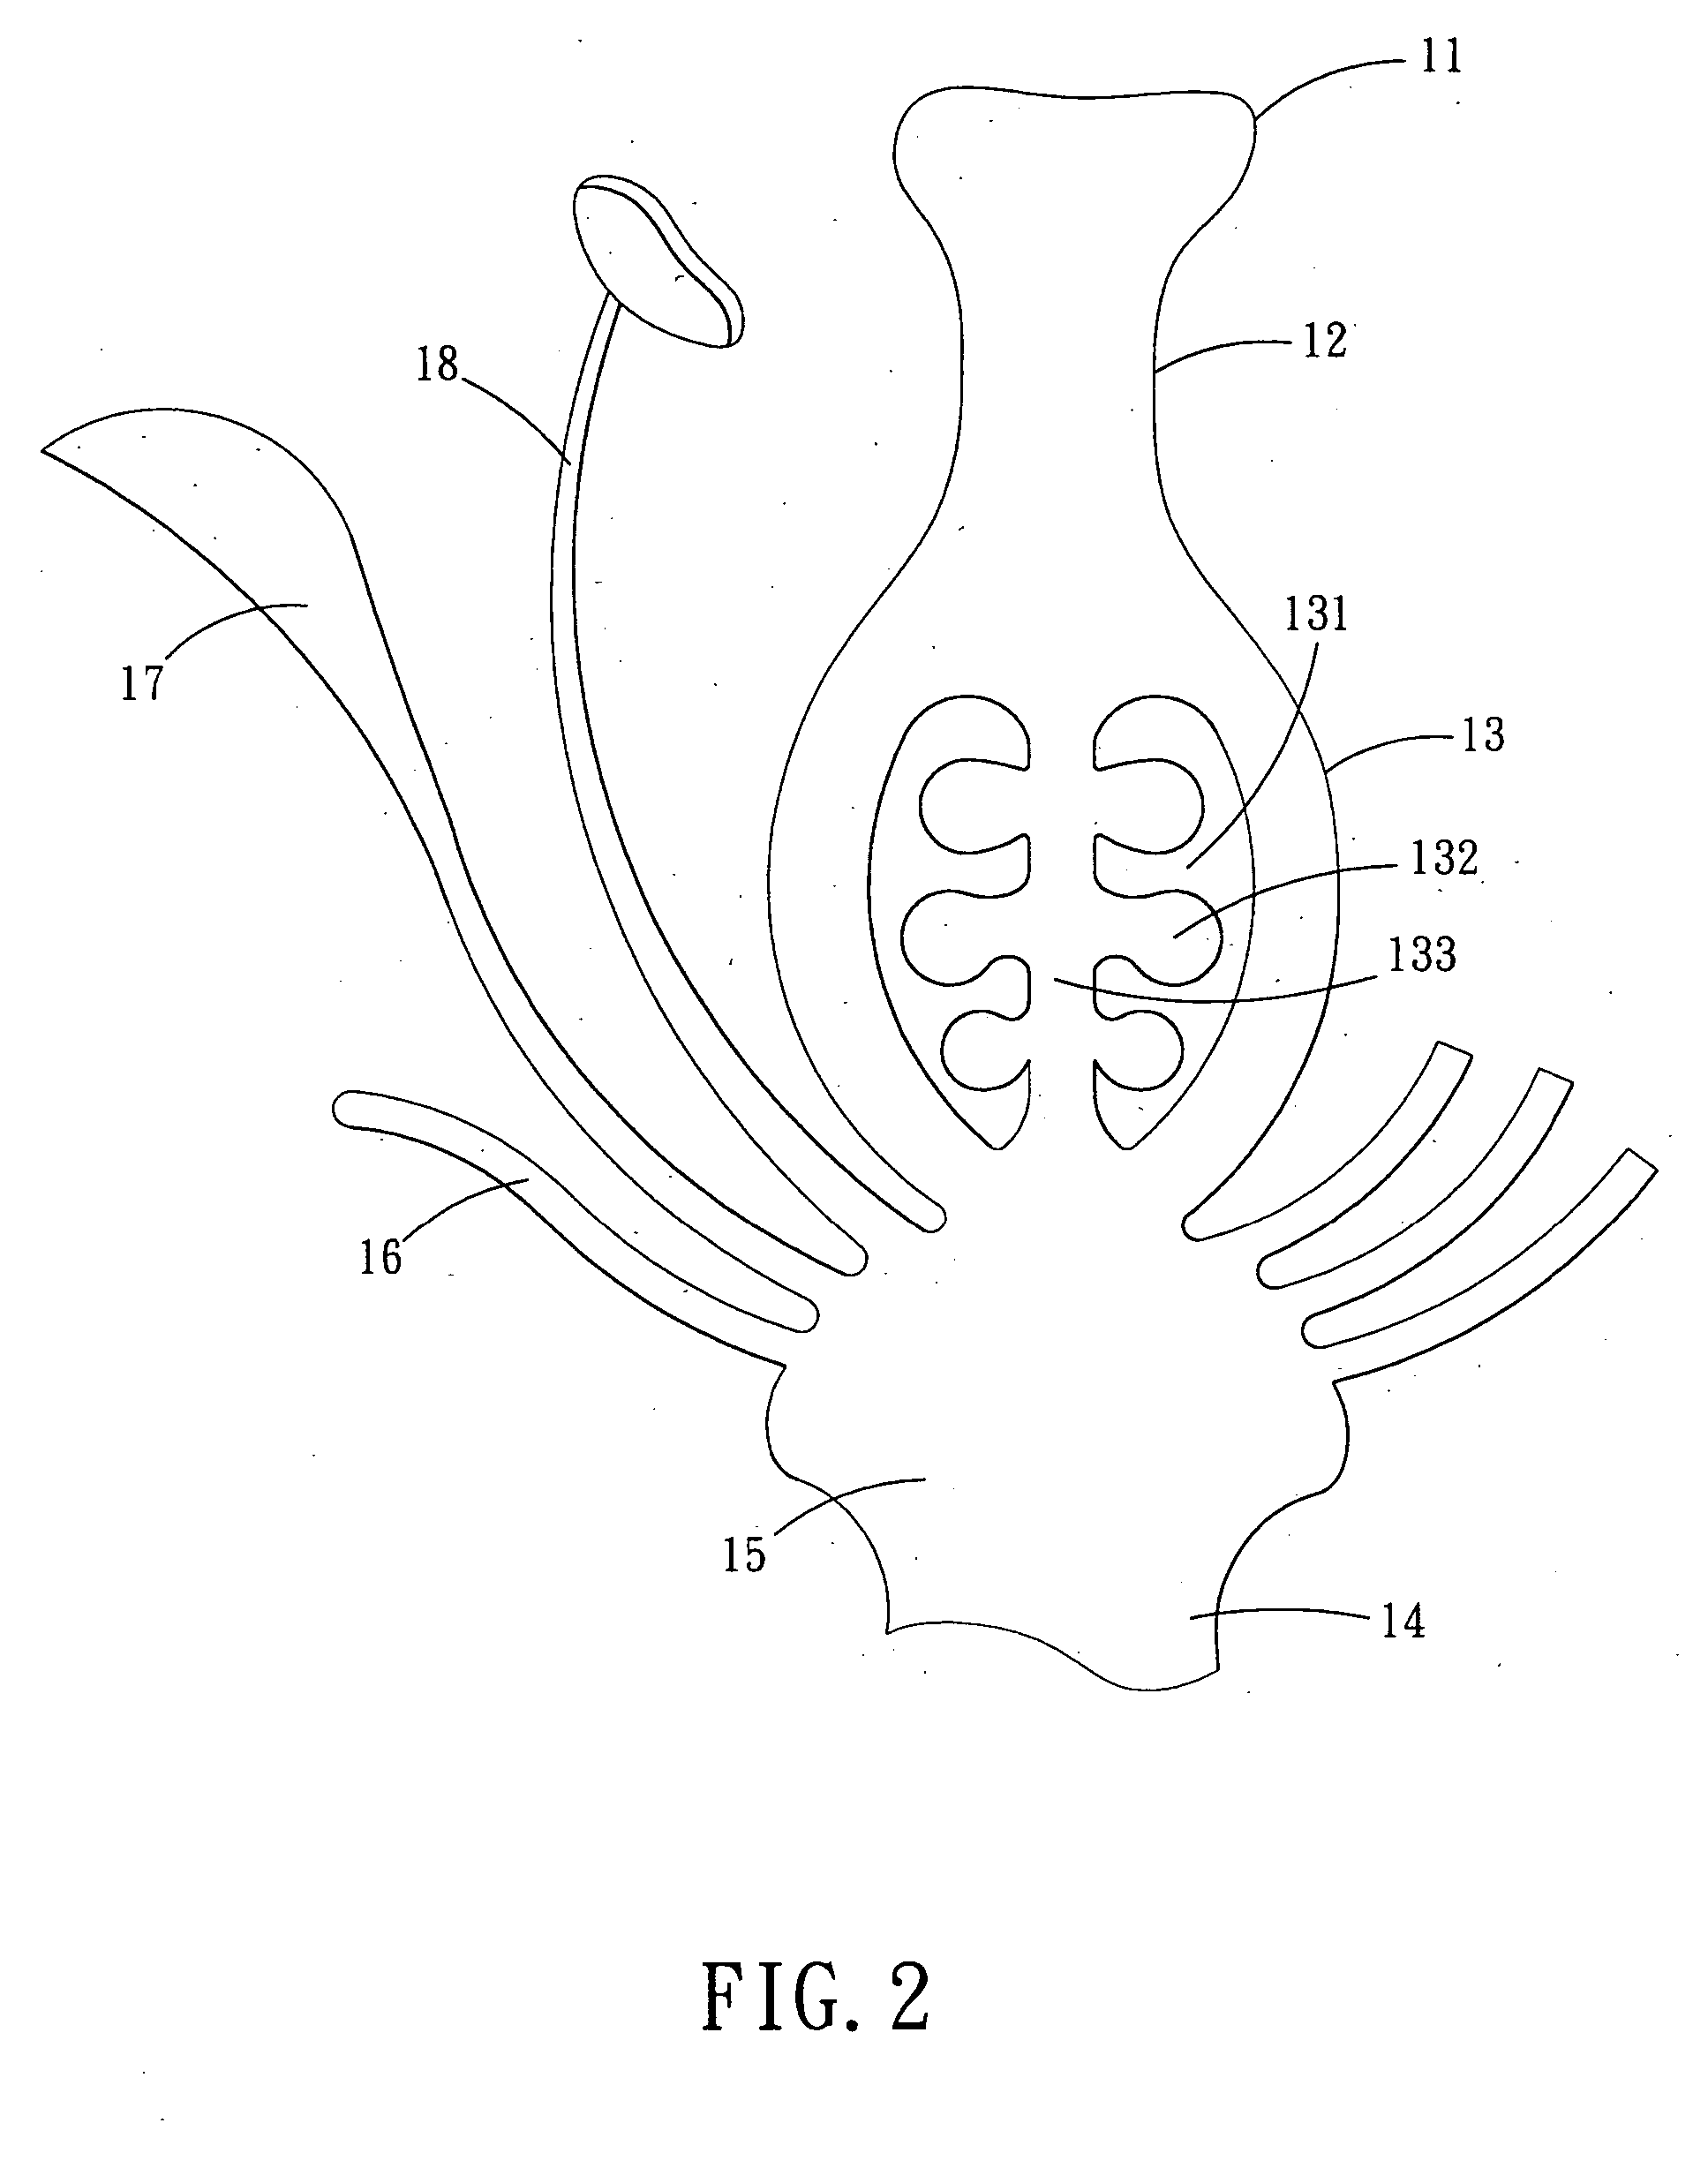 Method for plant gene transfering by electrical shock and ovary injection